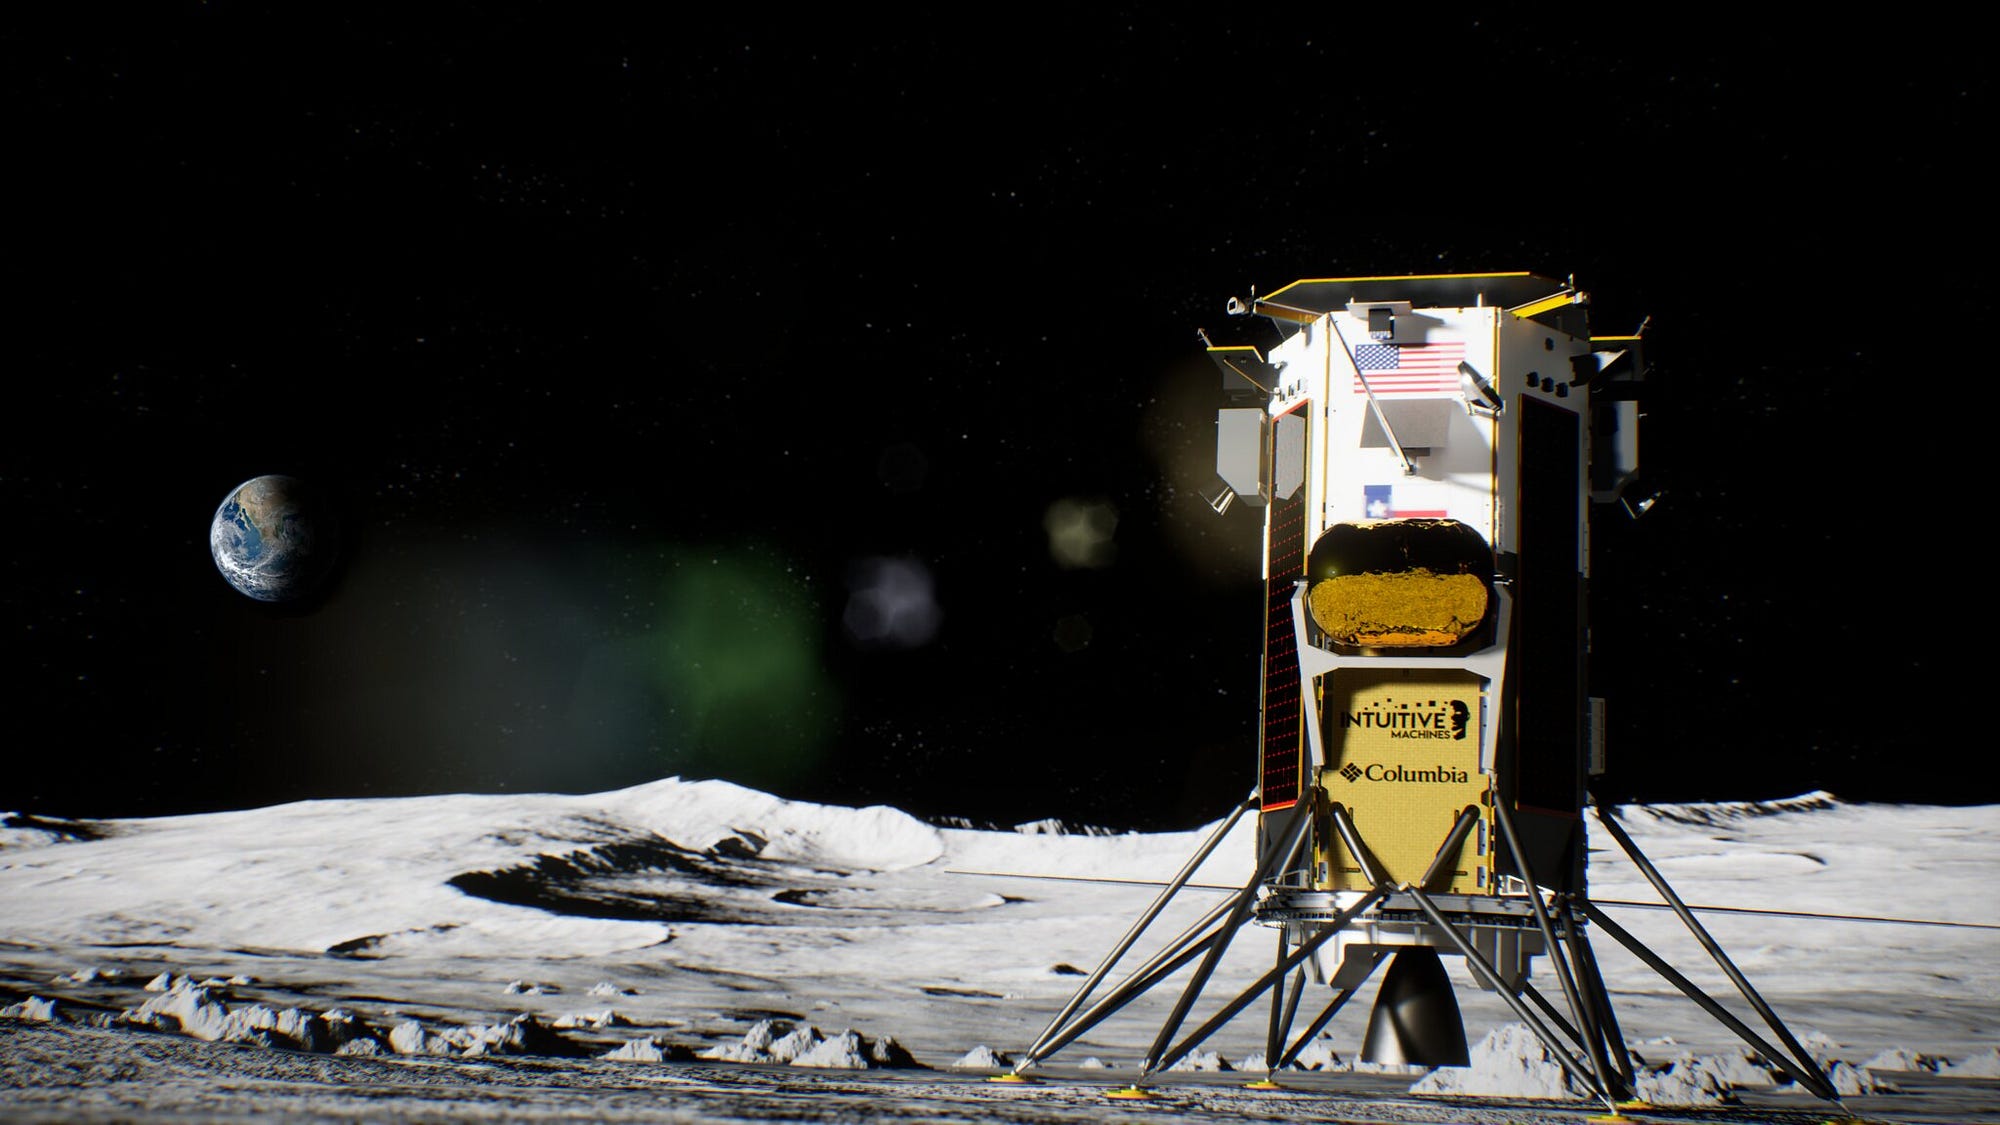 Pioneering the Cosmos: Private Enterprise Embarks on Lunar Odyssey